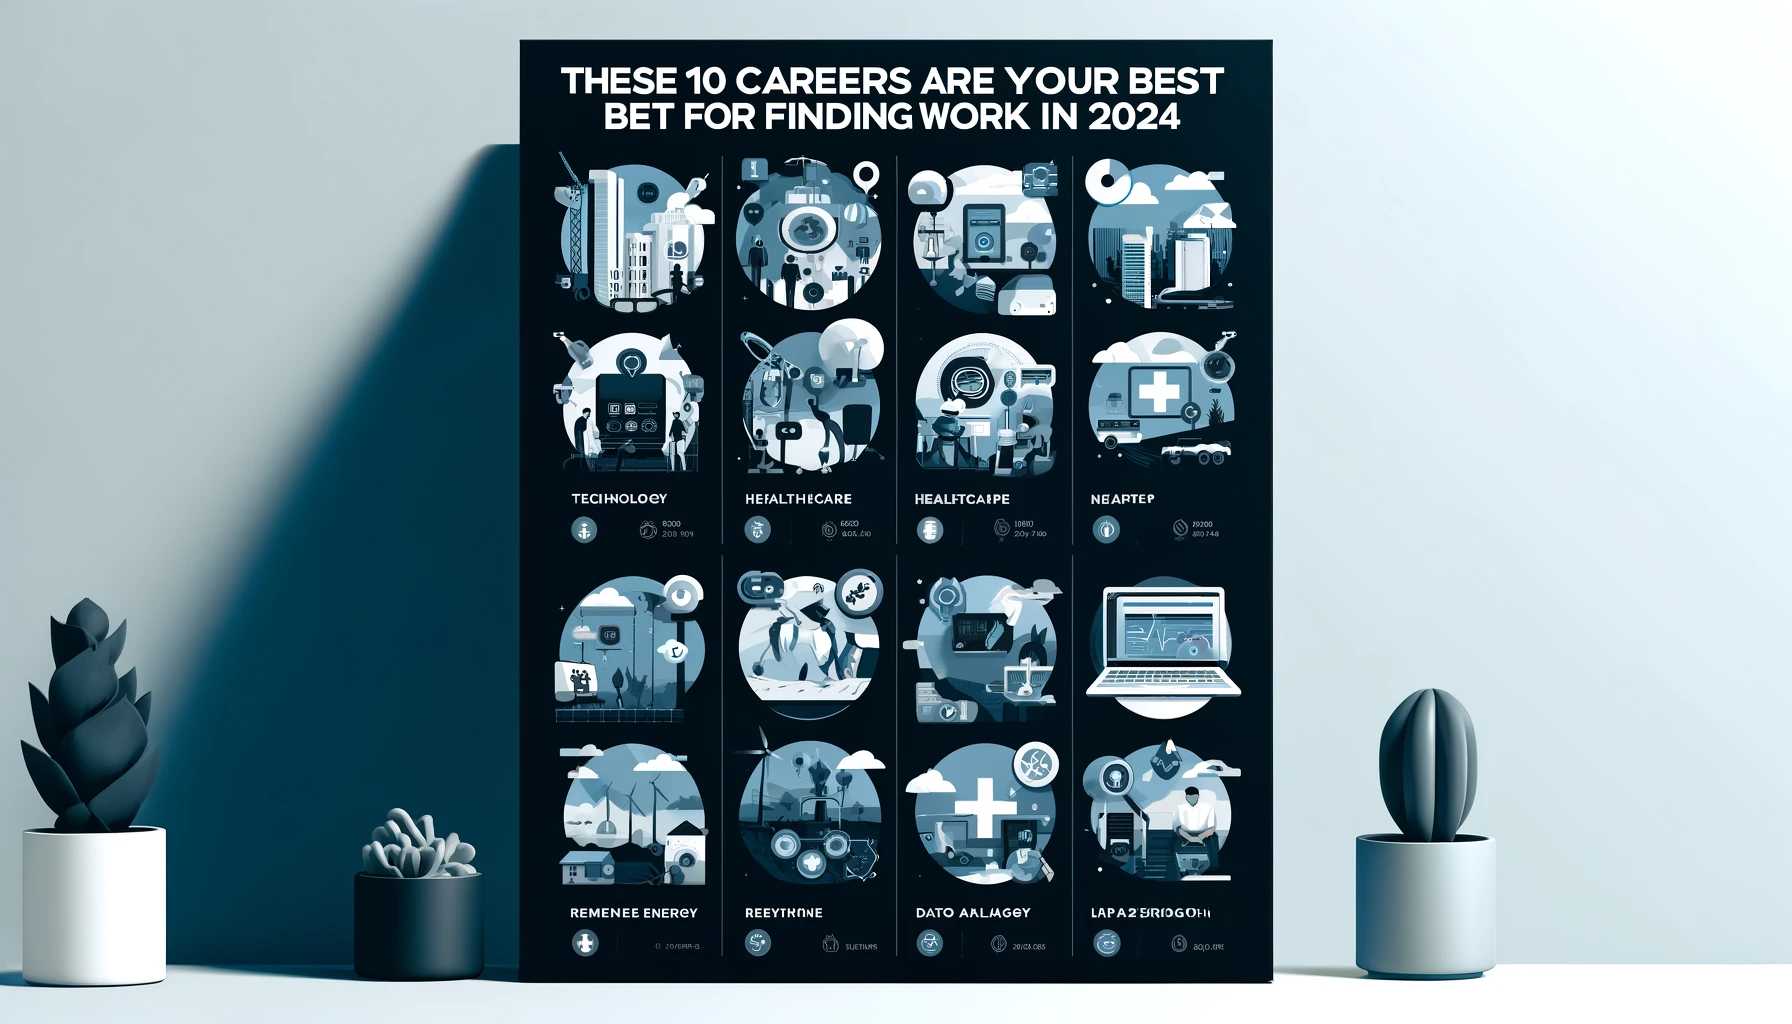 These 10 Careers are your Best Bet For Finding Work in 2024.